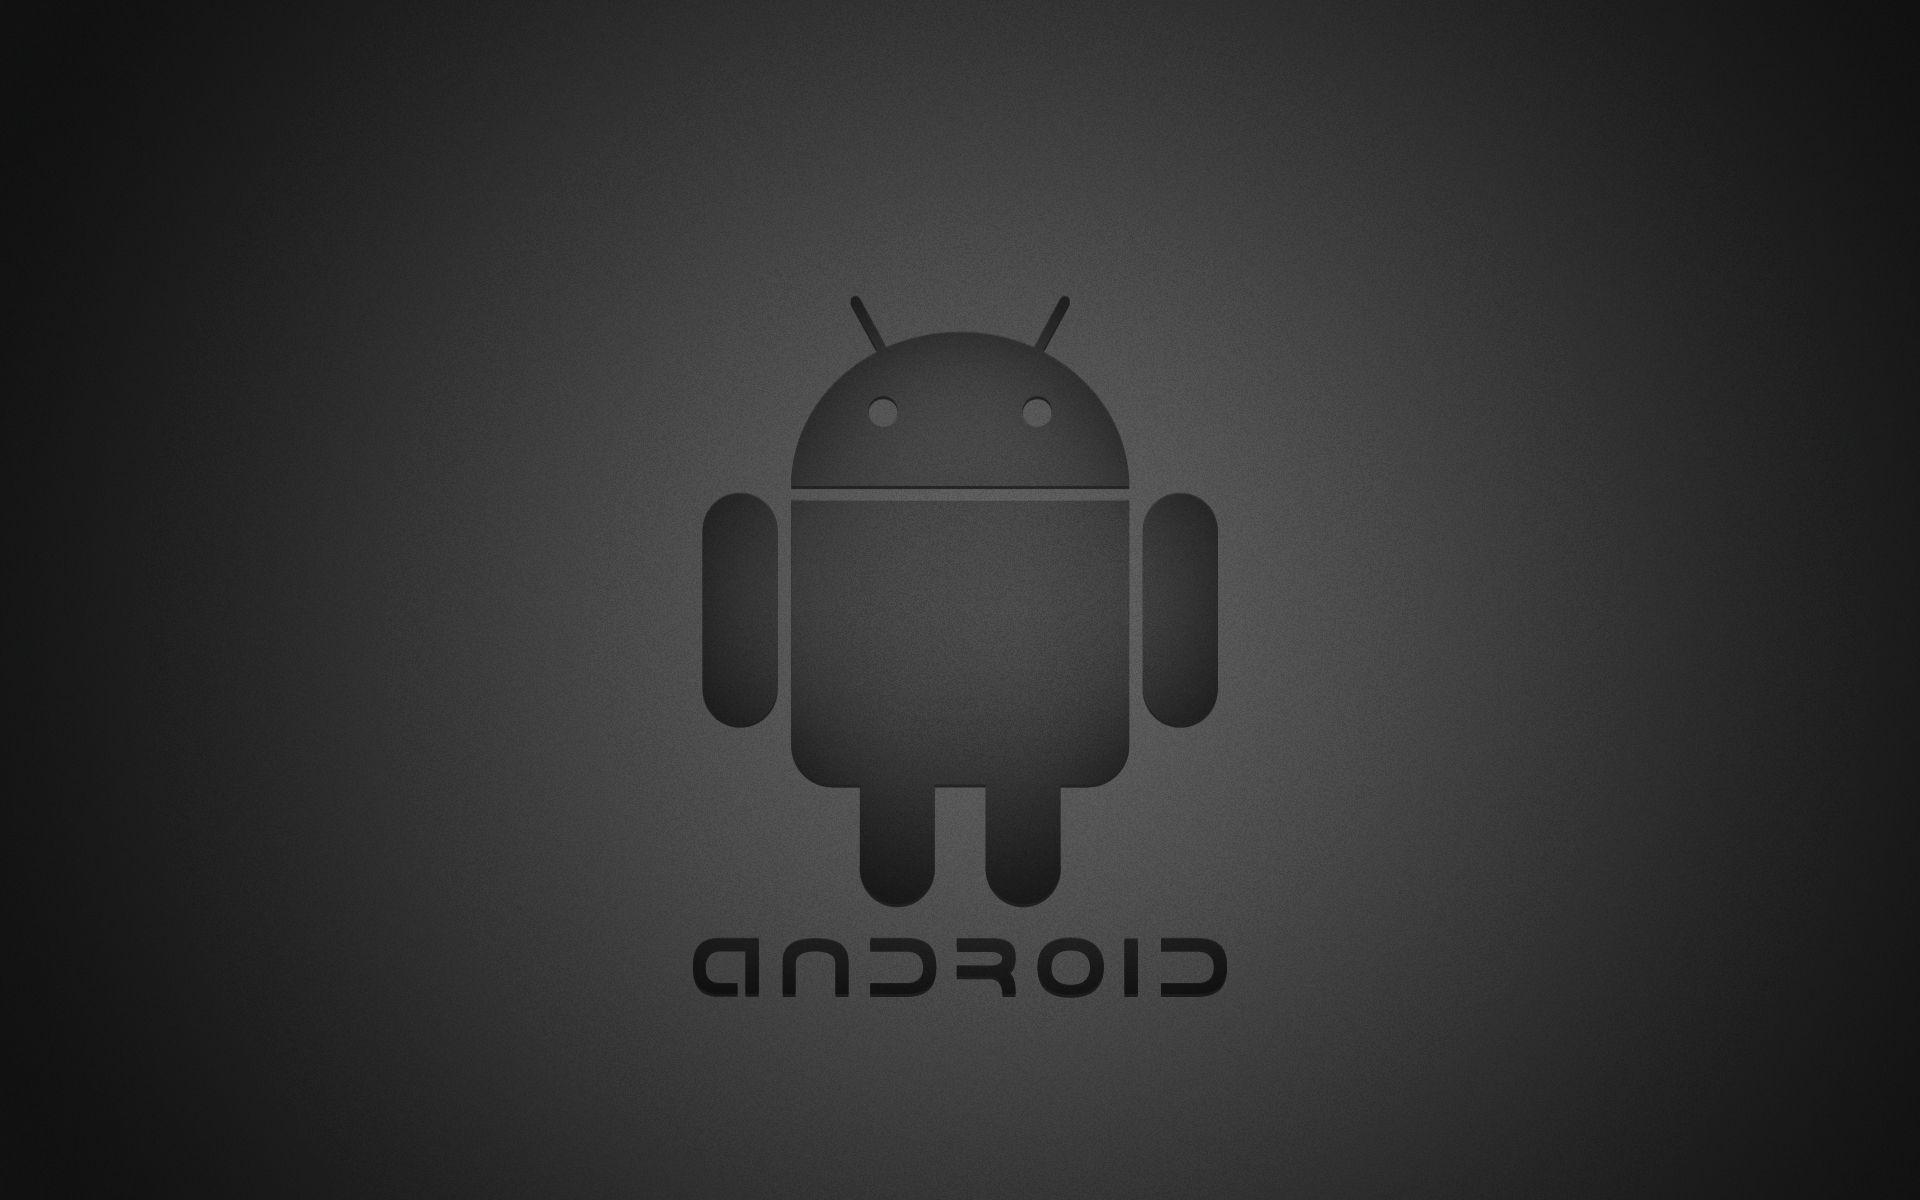 Tablet Wallpaper Android Image Download